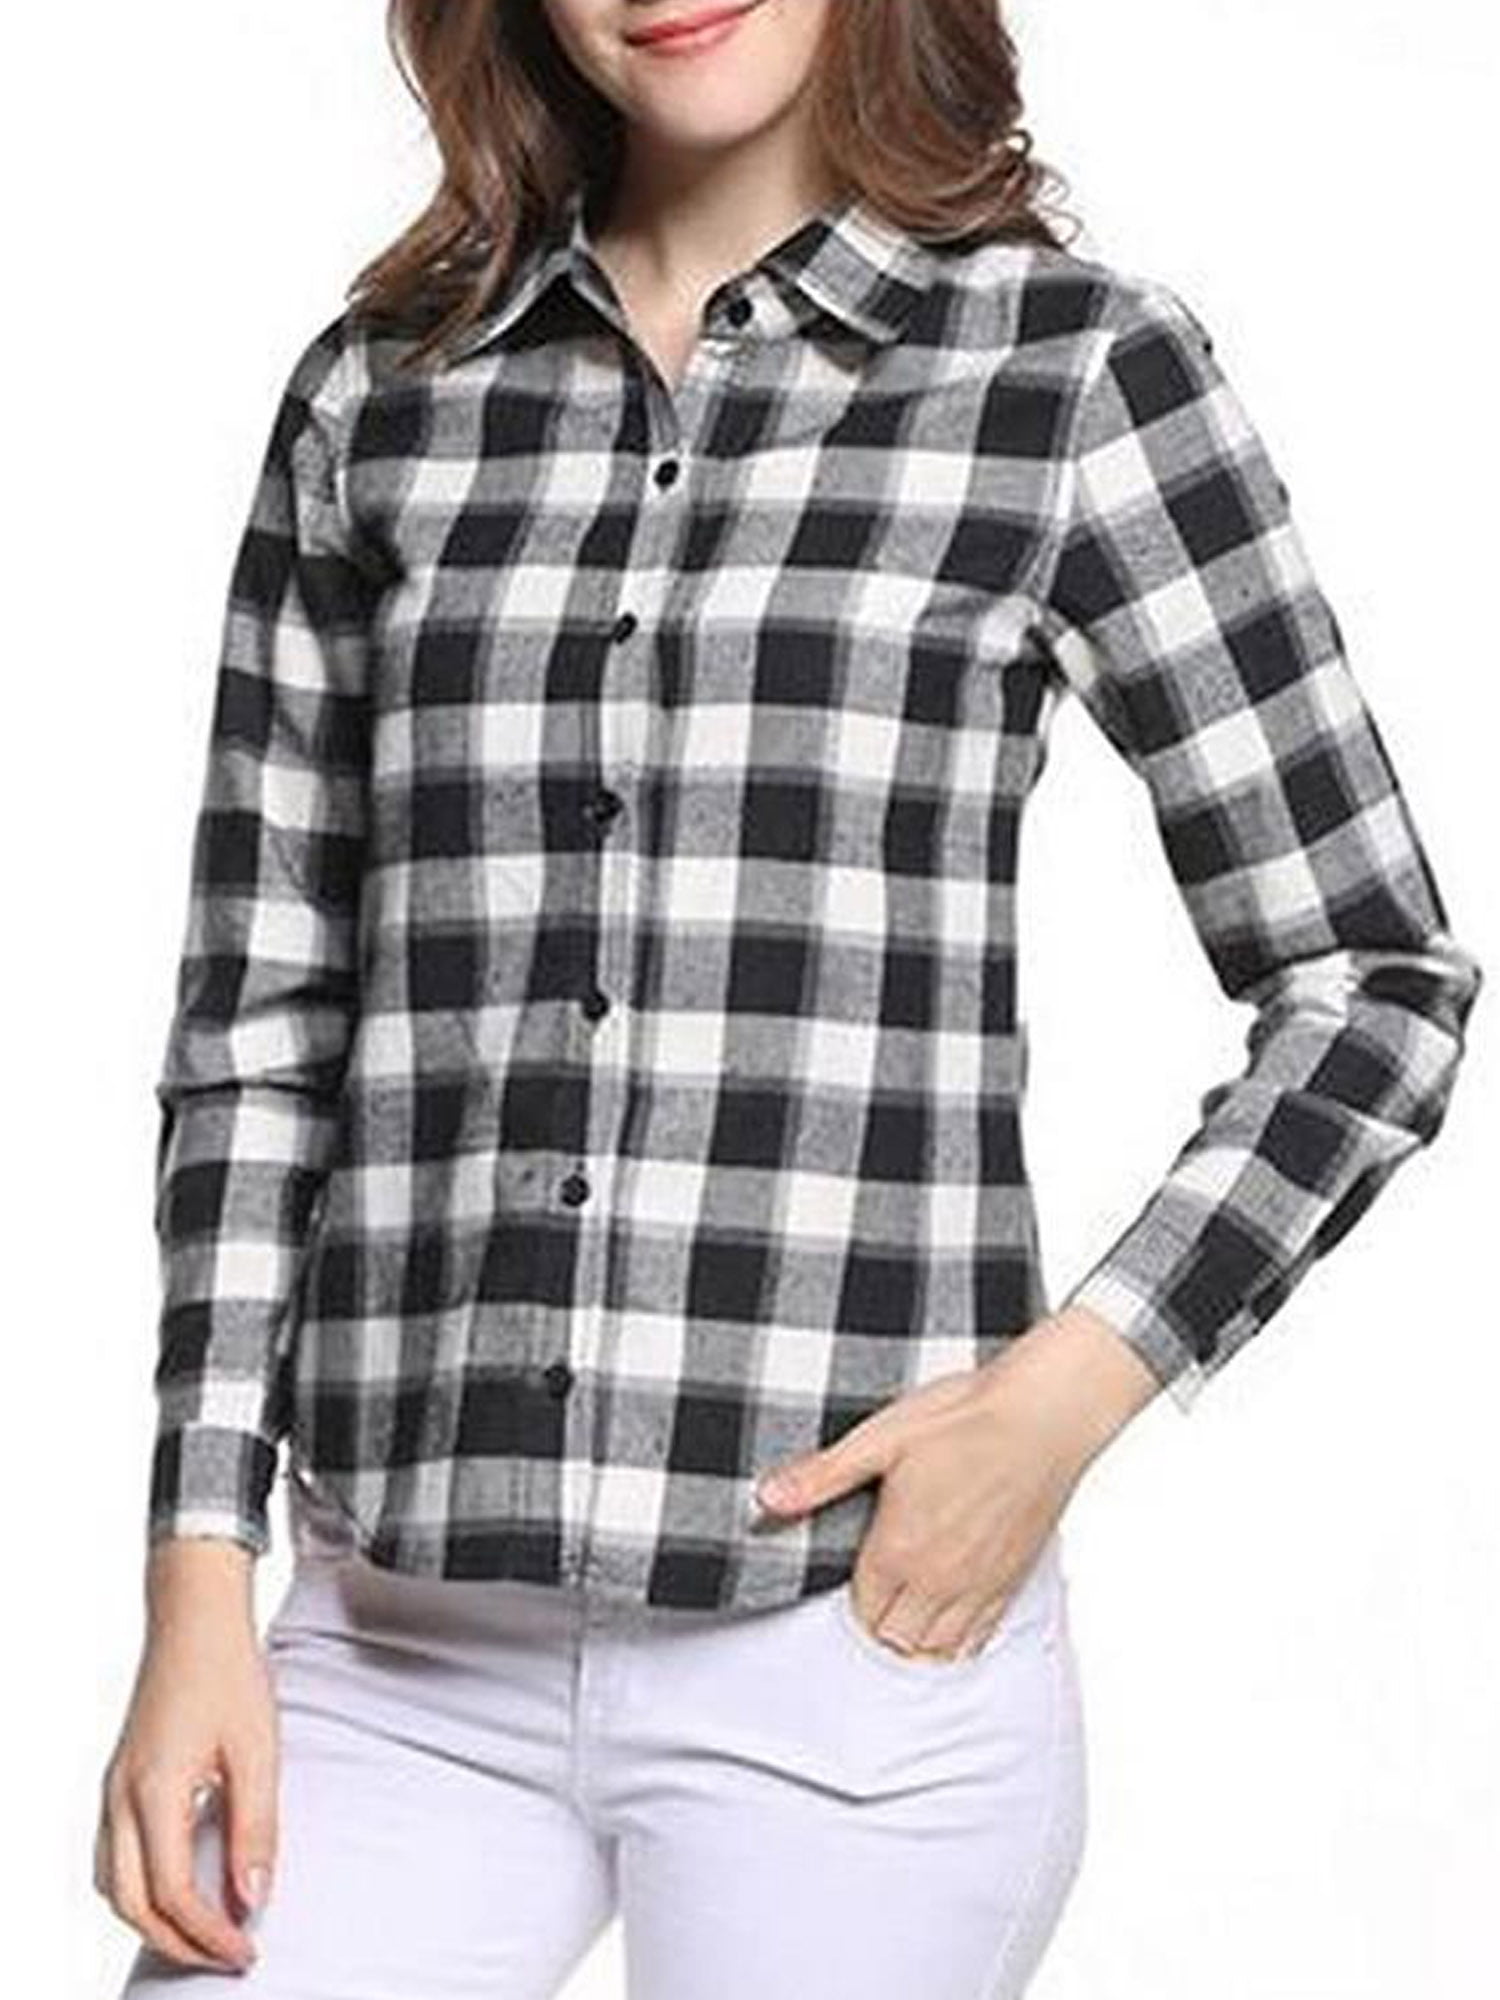 FOCUSNORM Women's Checkered Plaid Button Down Shirt Top with Roll Up ...